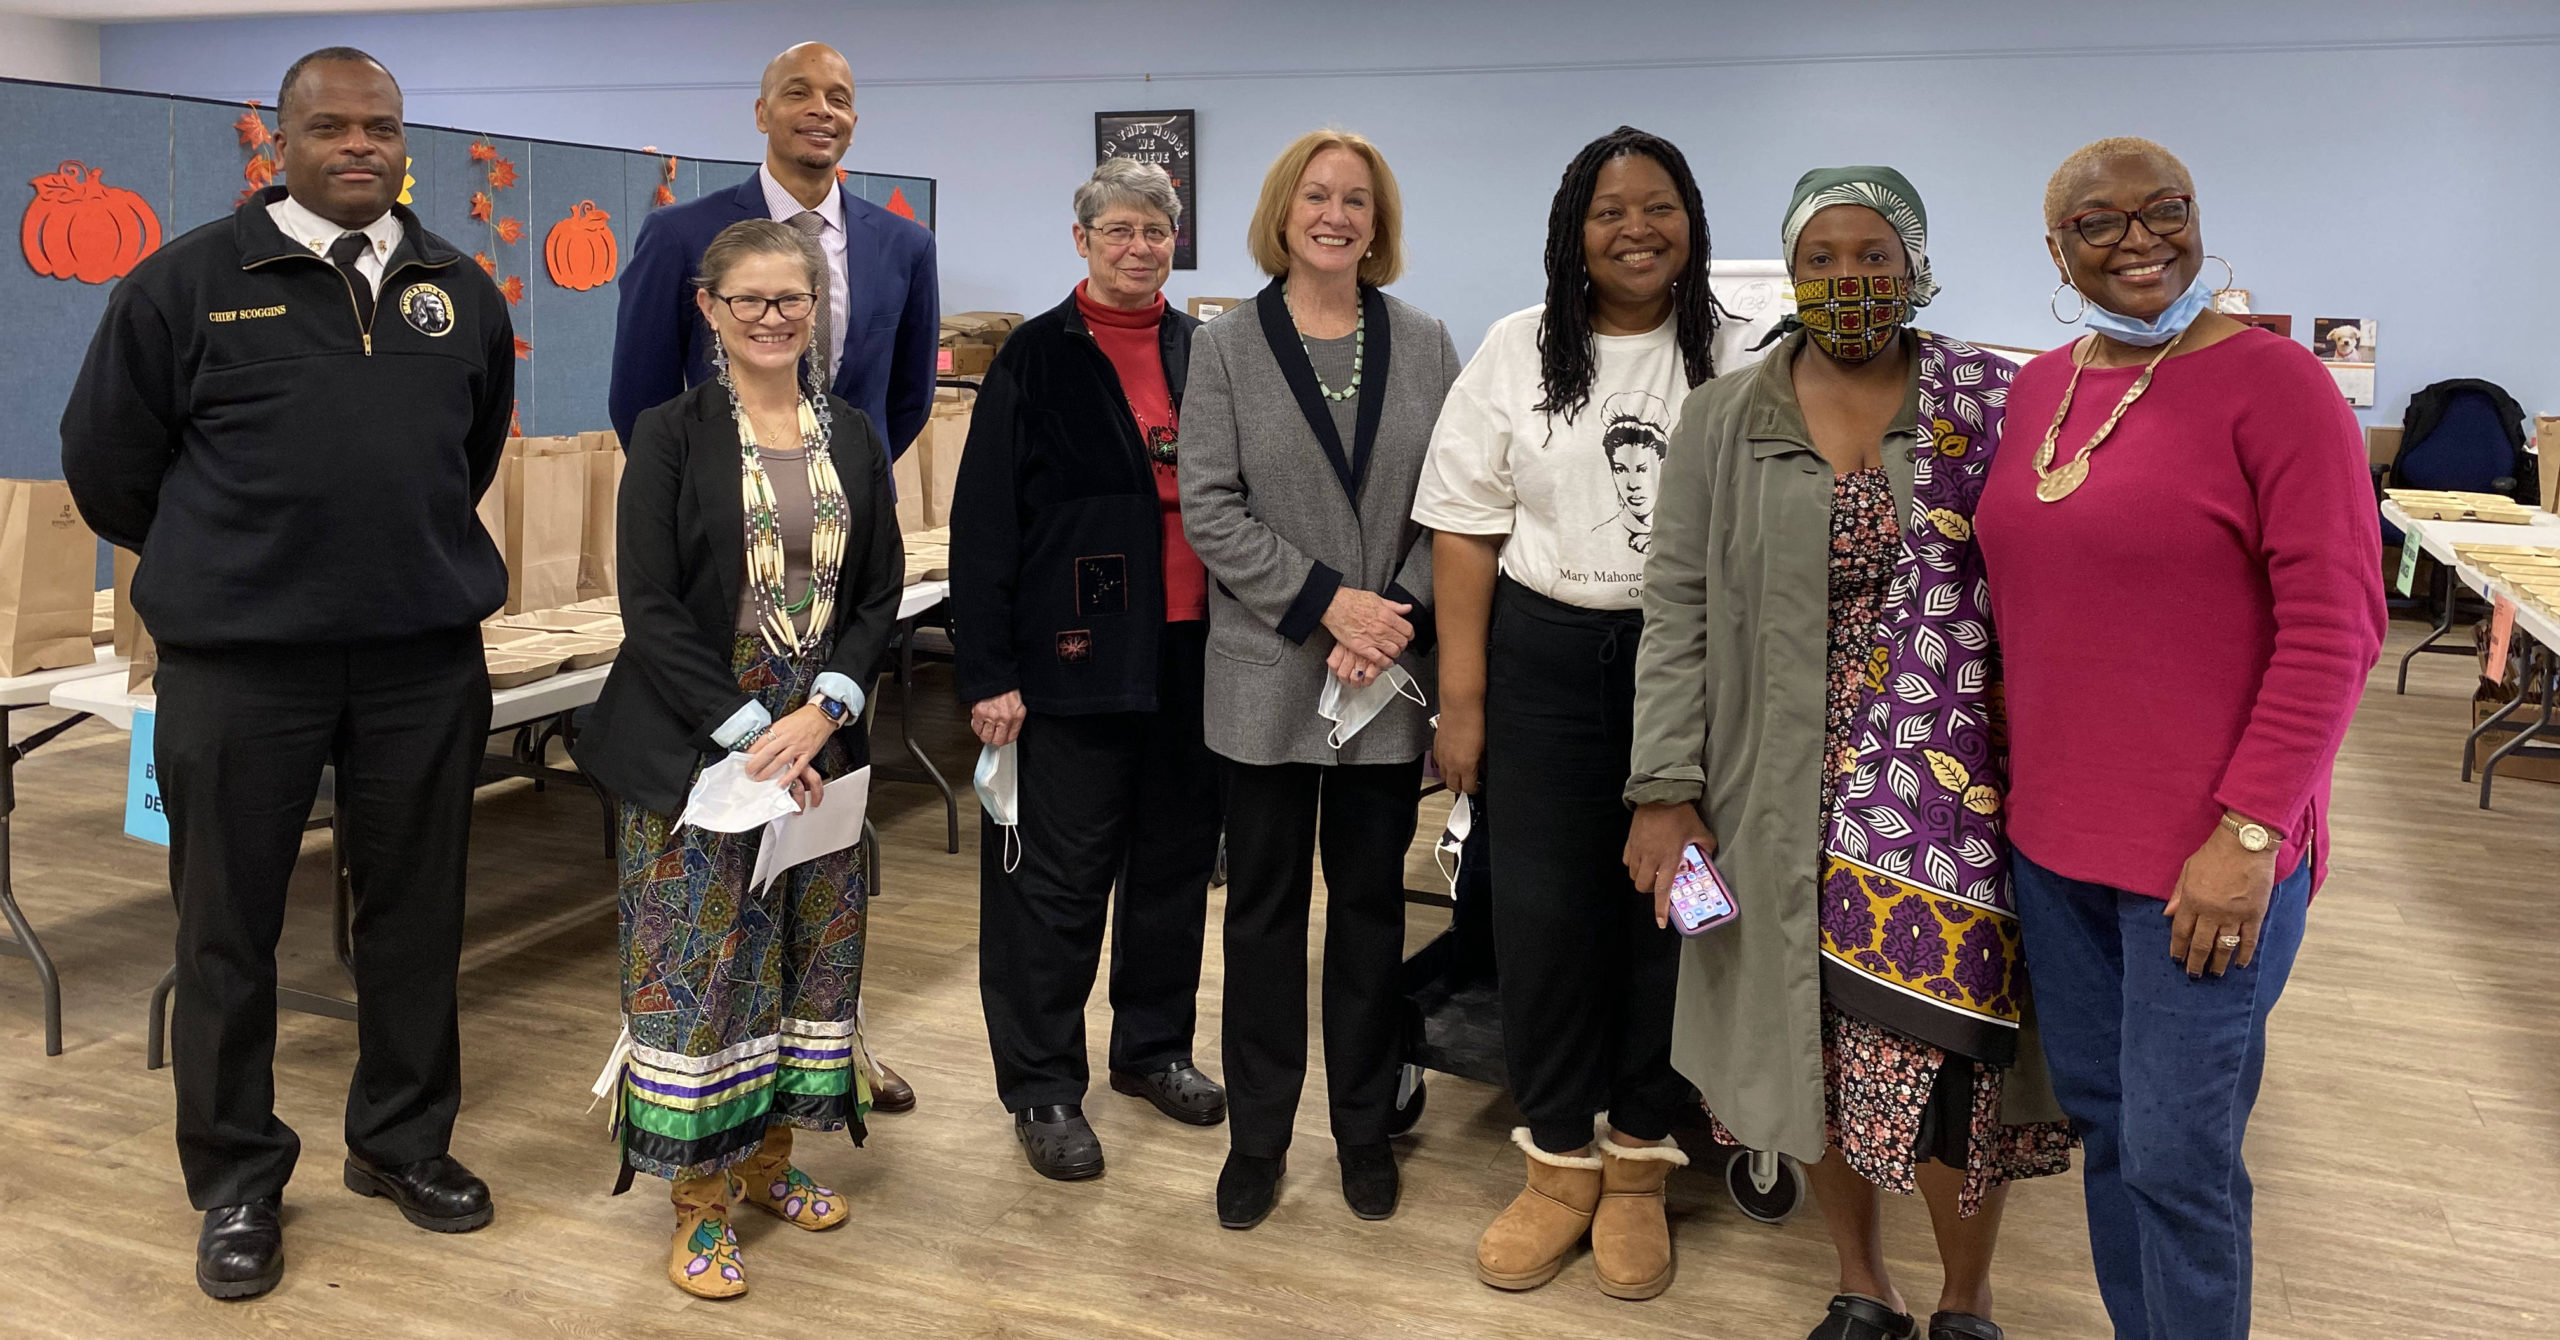 Mayor Durkan with community partners announcing opening of vaccine clinic at SouthEast Seattle Senior Center